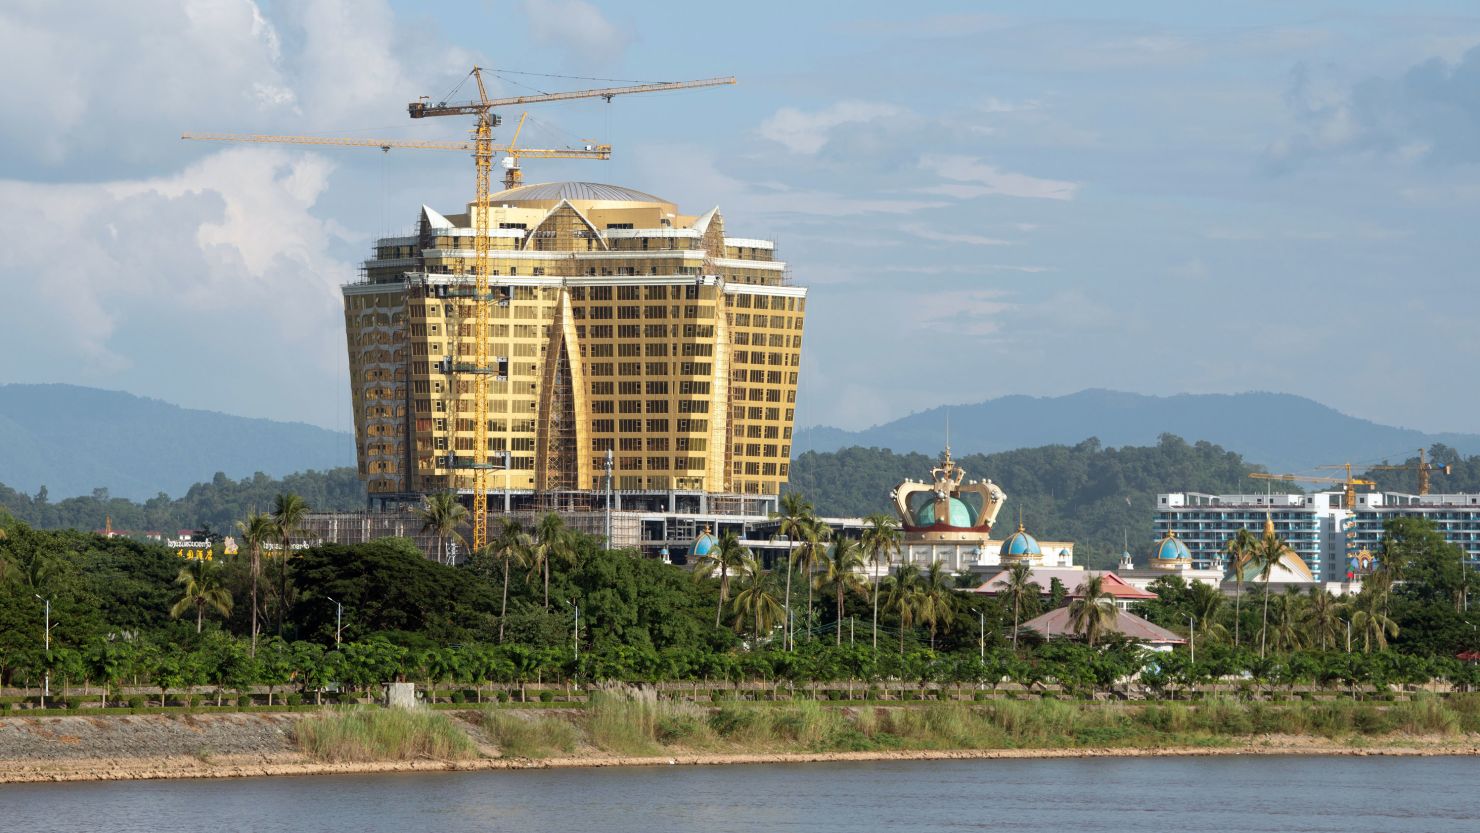 The Kings Romans Casino in Laos in is seen from Thailand in this file photograph from 2019.